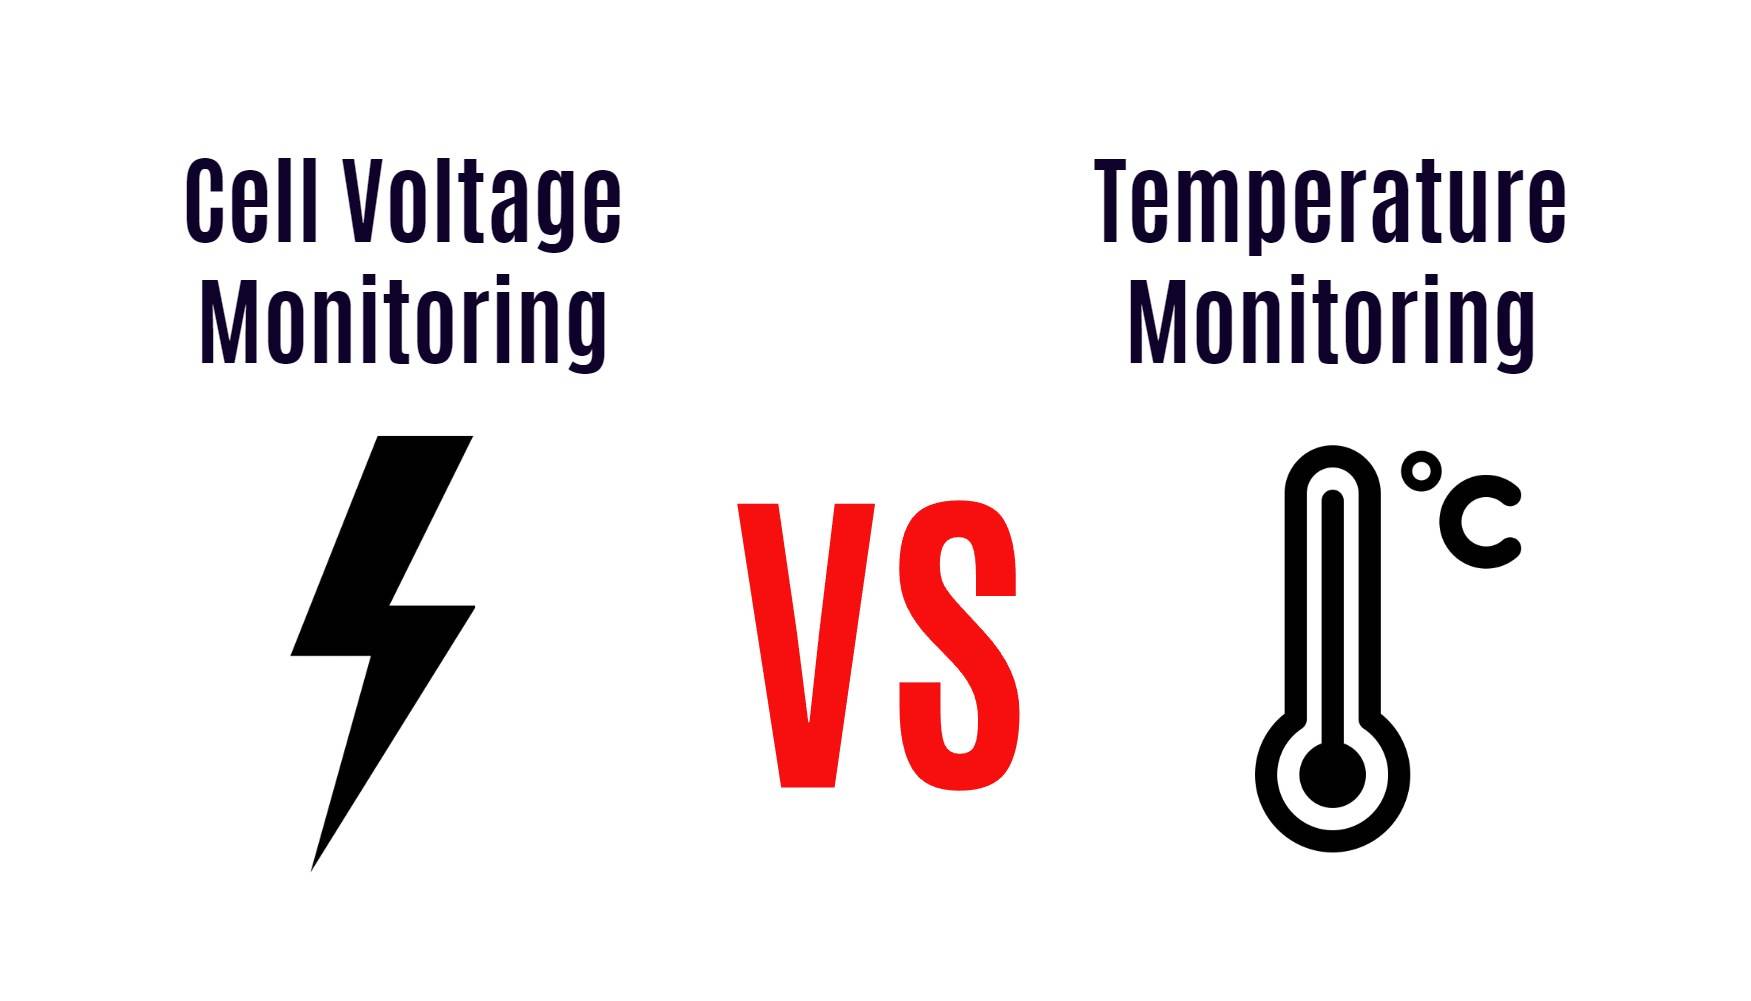 Cell Voltage Monitoring in BMS vs. Temperature Monitoring